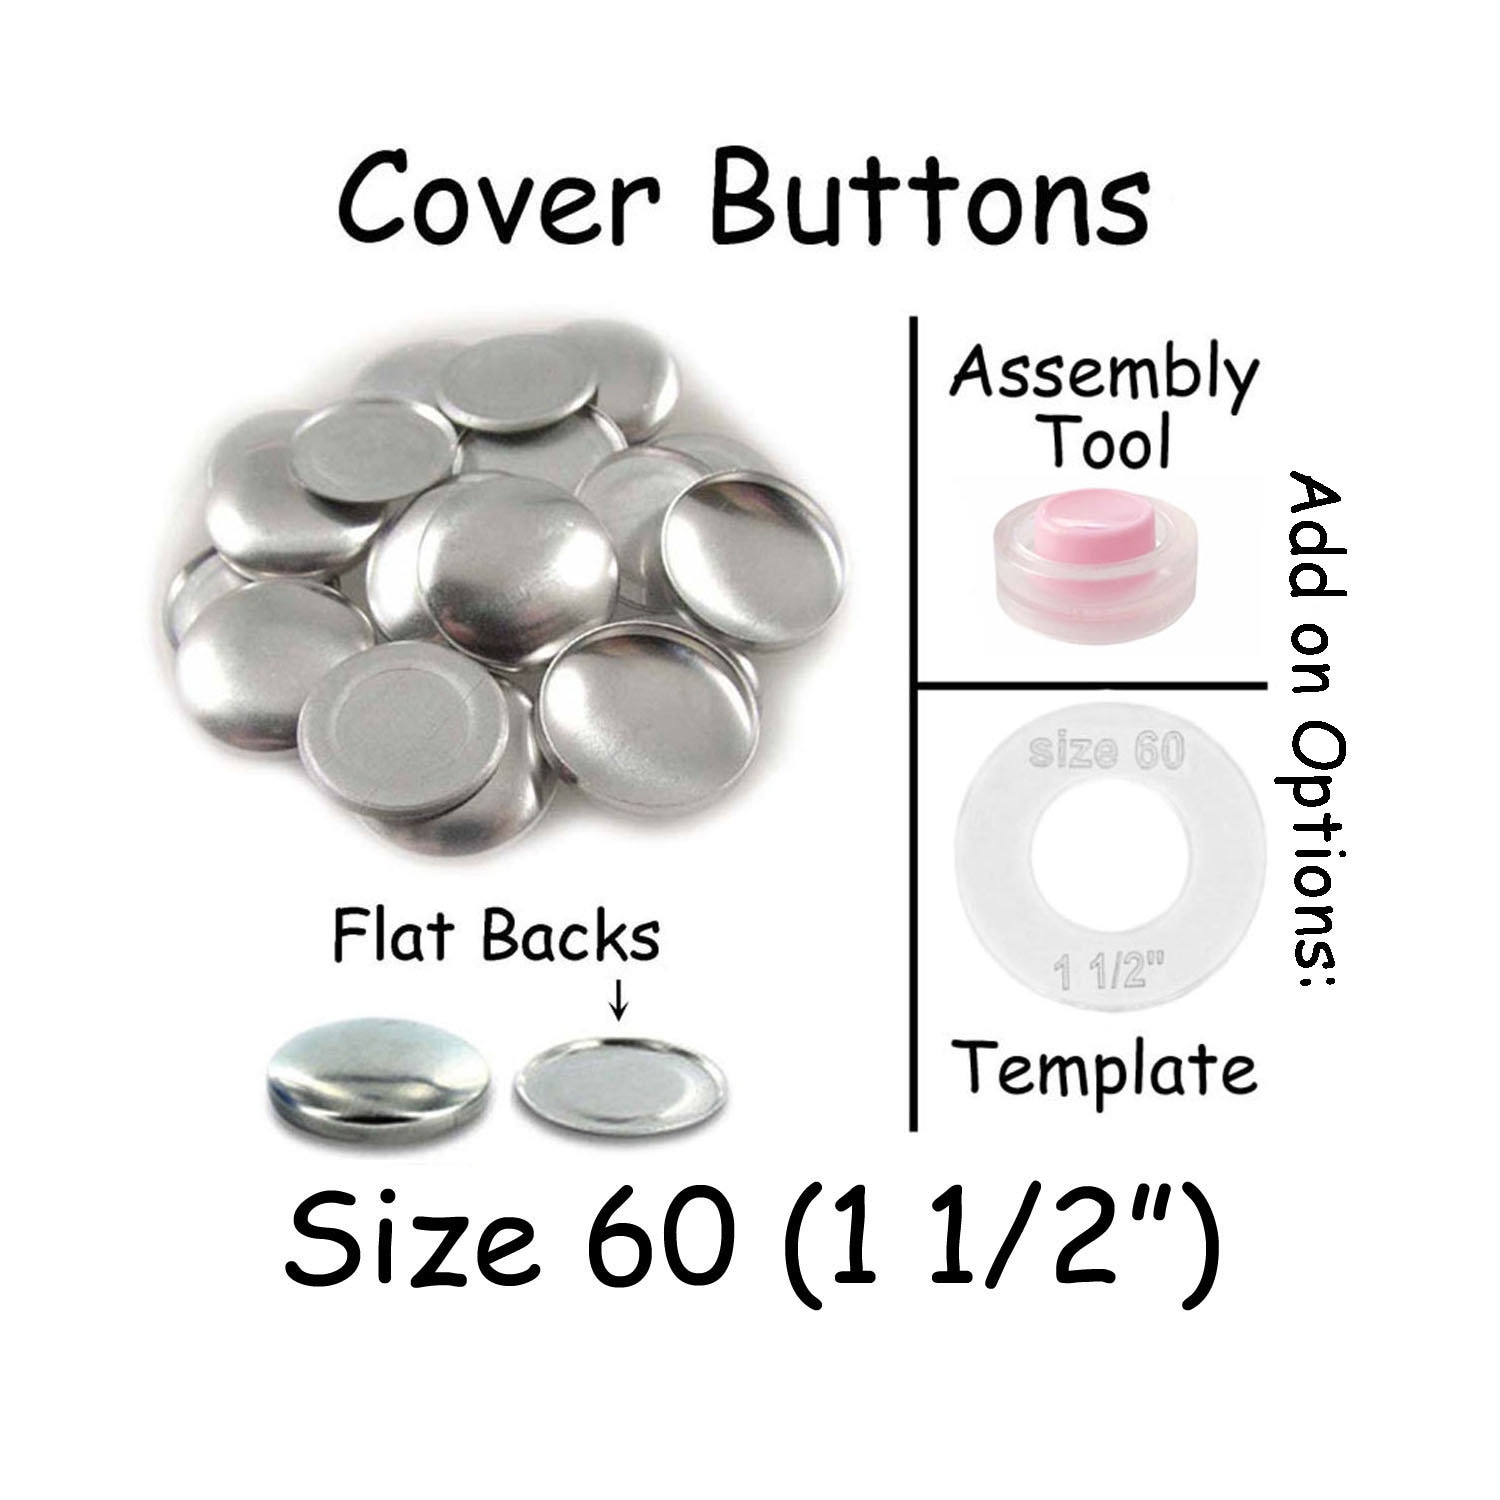 Fabric Covered Button Kit Flat Back Button Covers Kit Covered Button Kit  Cover Buttons Starter Kit